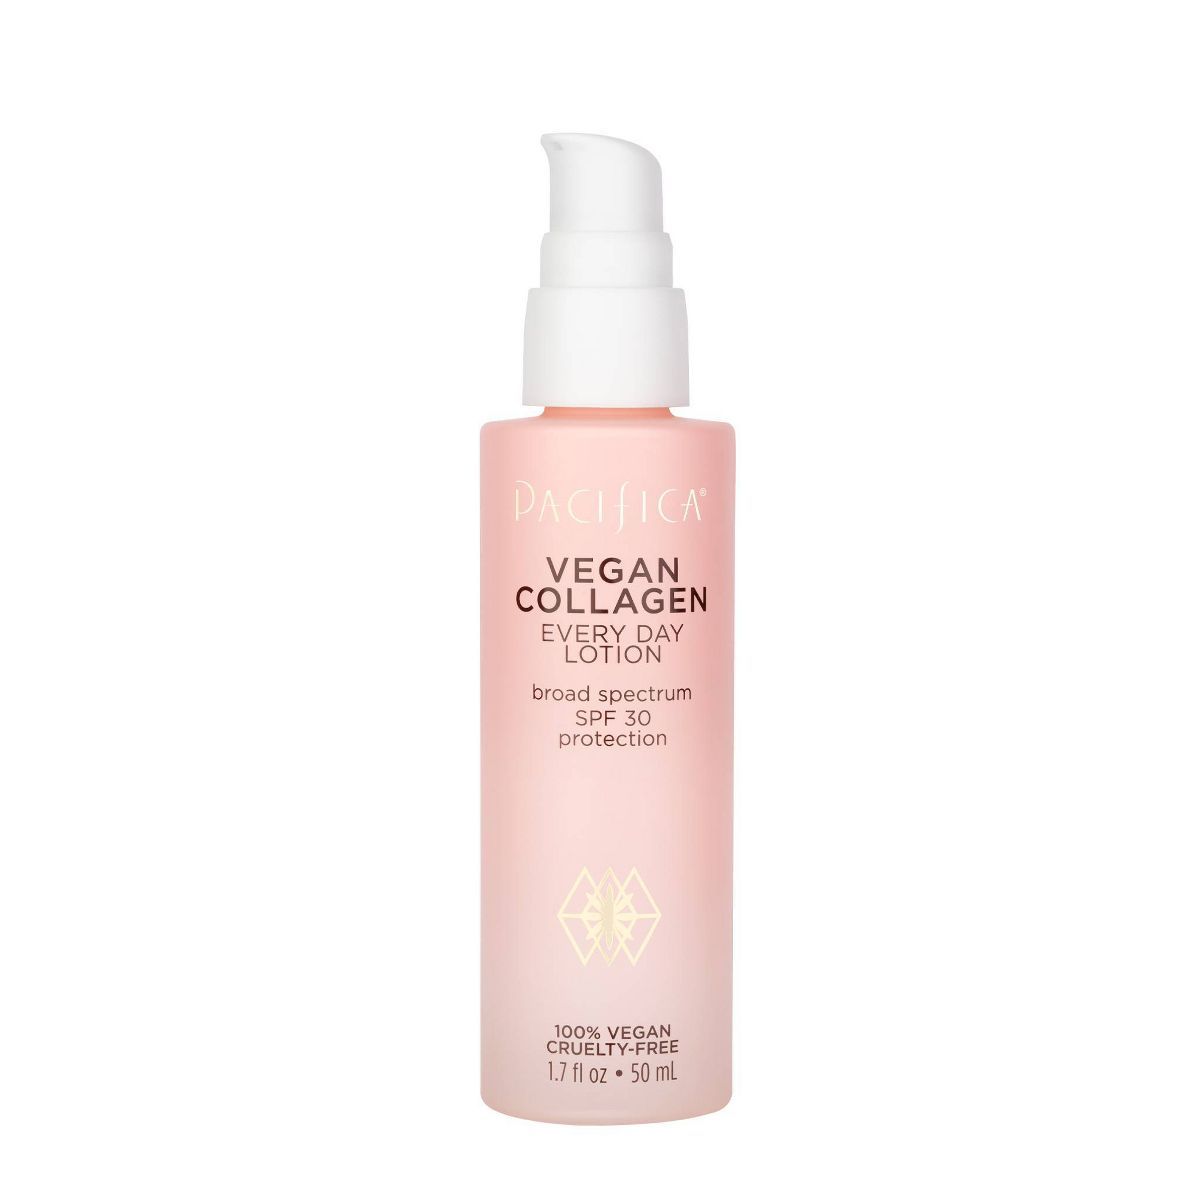 Pacifica Vegan Collagen Every Day Lotion Floral - 1.7 fl oz | Target